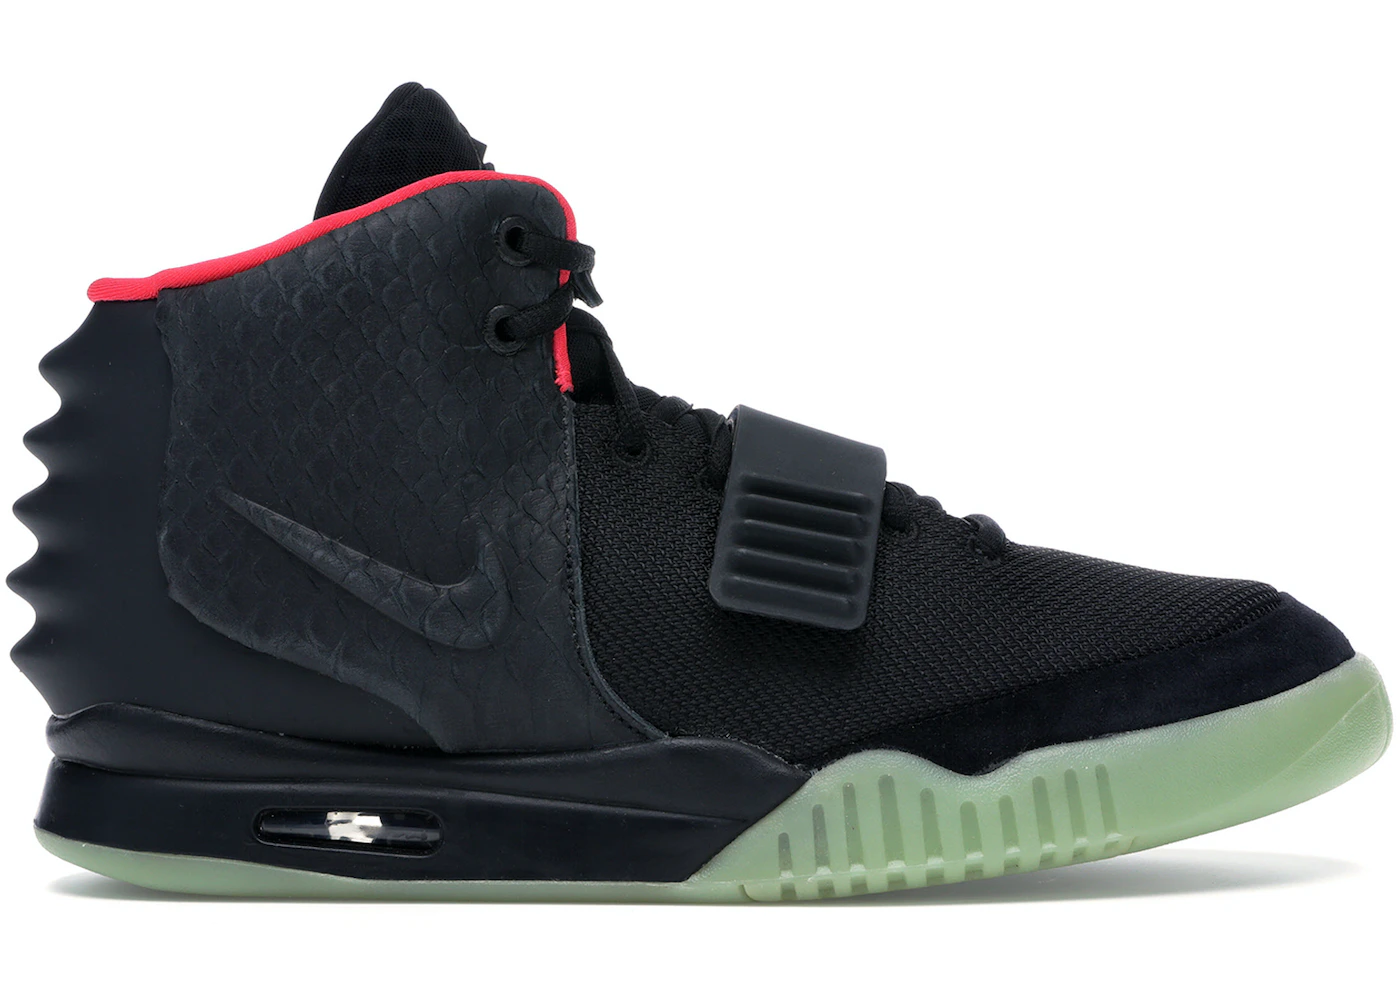 Pay tribute Systematically George Stevenson Nike Air Yeezy 2 Solar Red Men's - 508214-006 - US